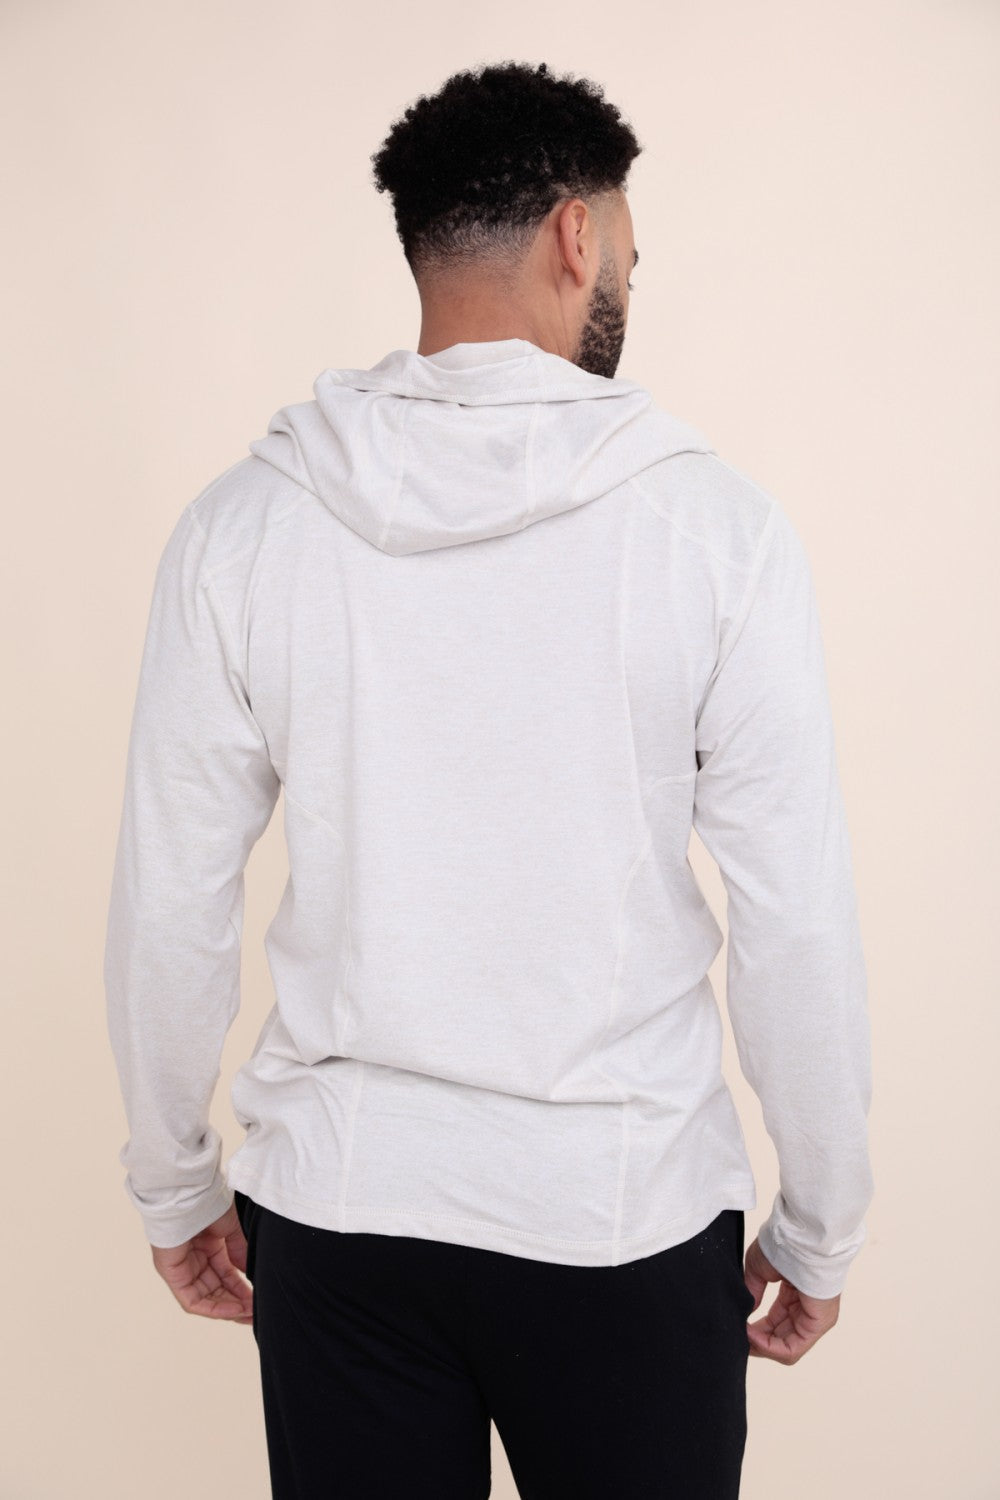 The Drake Pullover Hoodie is a unisex staple. Featuring long sleeves, a pullover design, and zipper pockets, this hoodie provides reliable comfort and warmth. Constructed from a durable, soft fabric, you'll enjoy snuggling up with your favorite hoodie.